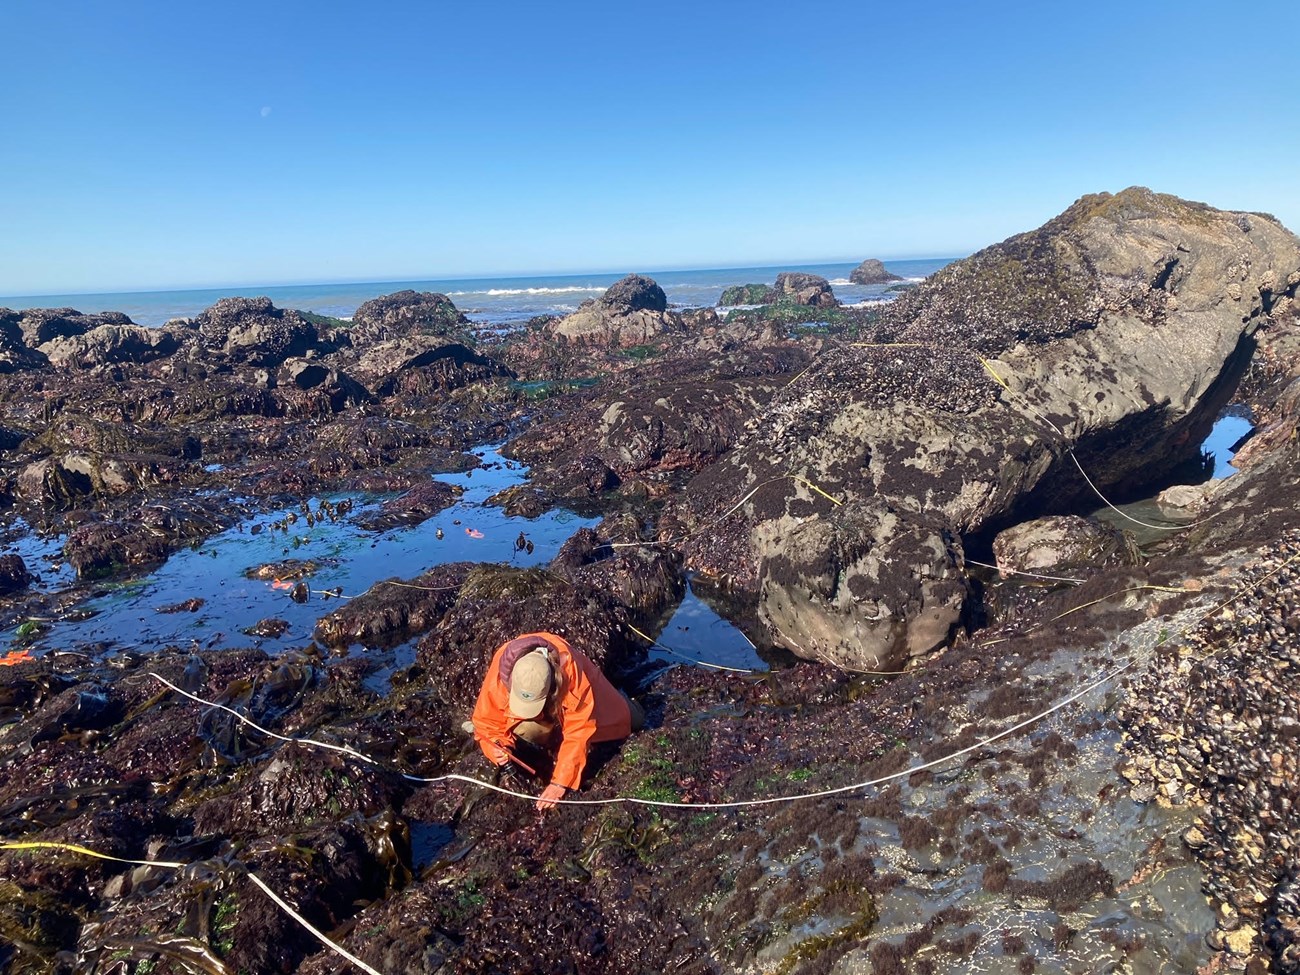 Researcher leans over an extended measuring tape on the ground to document intertidal organisms.